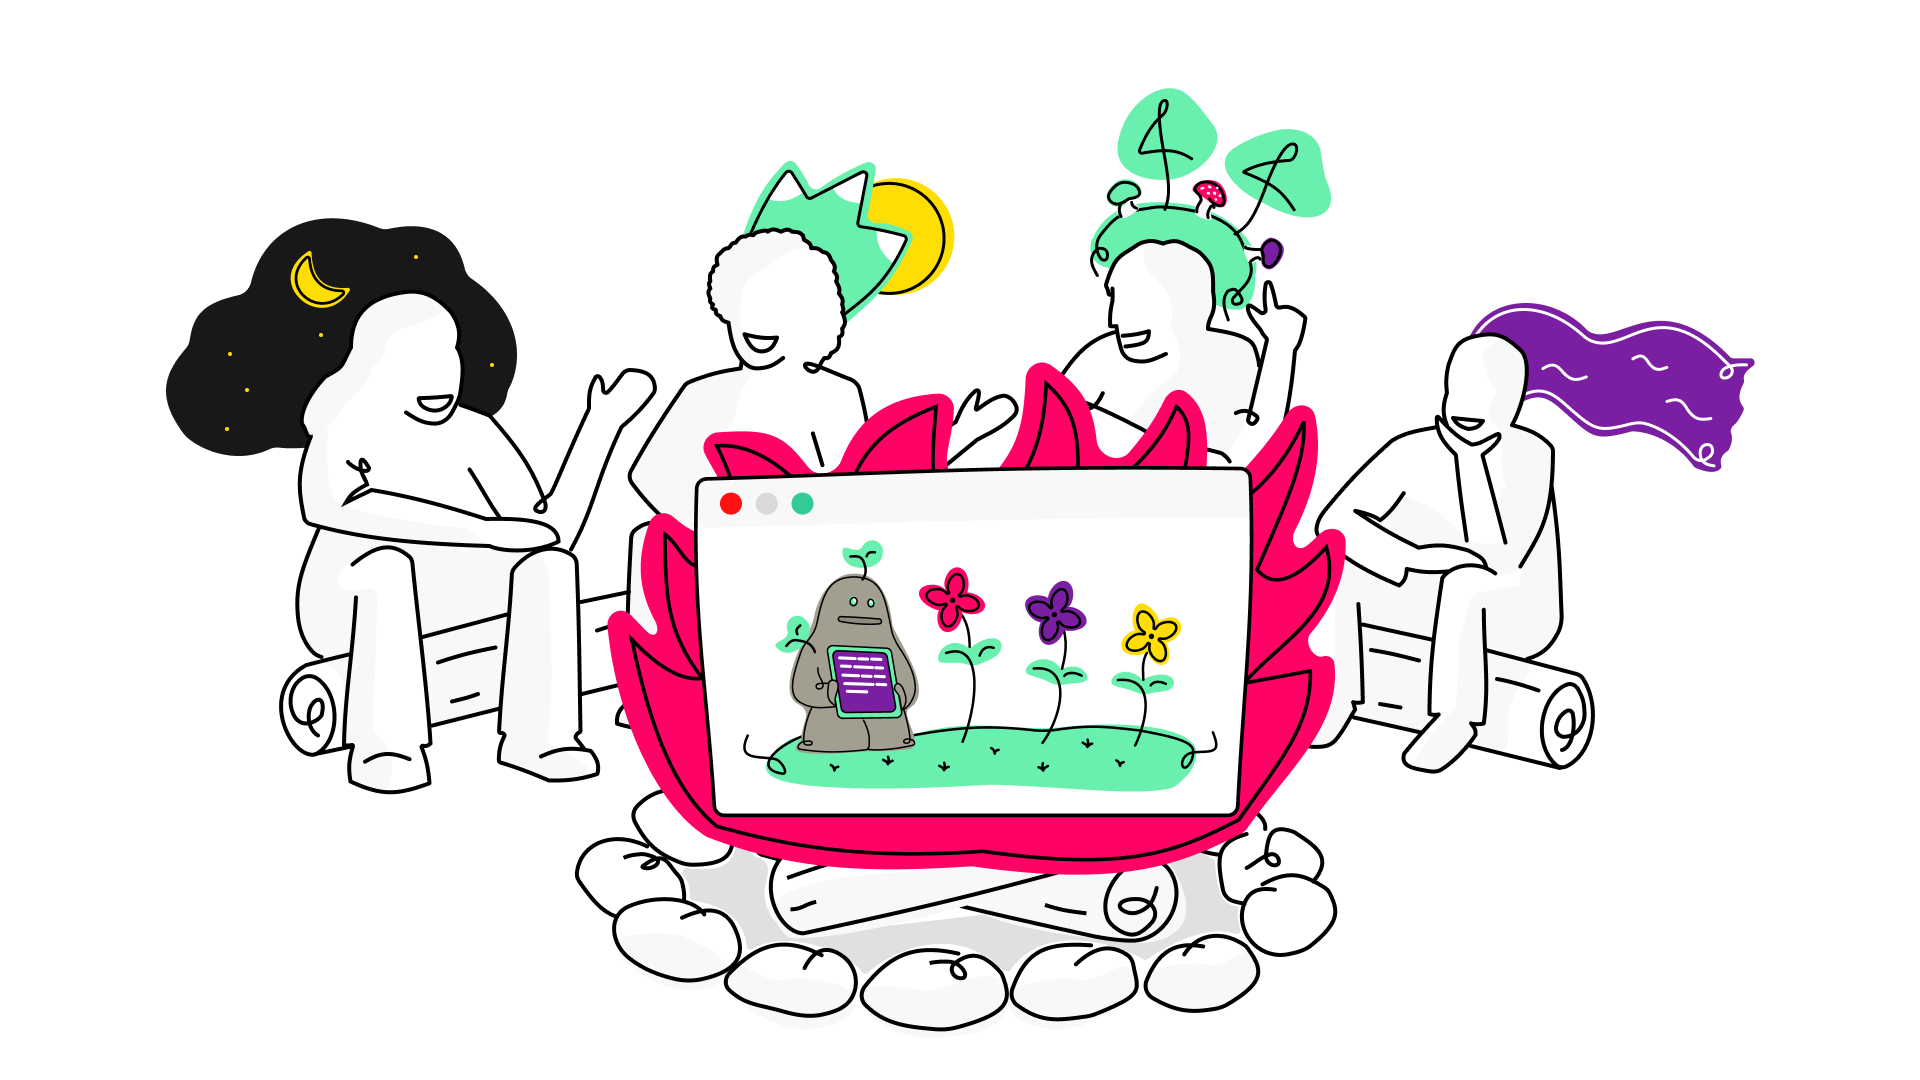 Illustration of four people sitting around a campfire, each person with a place influencing their thoughts. The fire in the campfire is an app that represents ETHOS Gardening based on the Elemental Ethics framework.